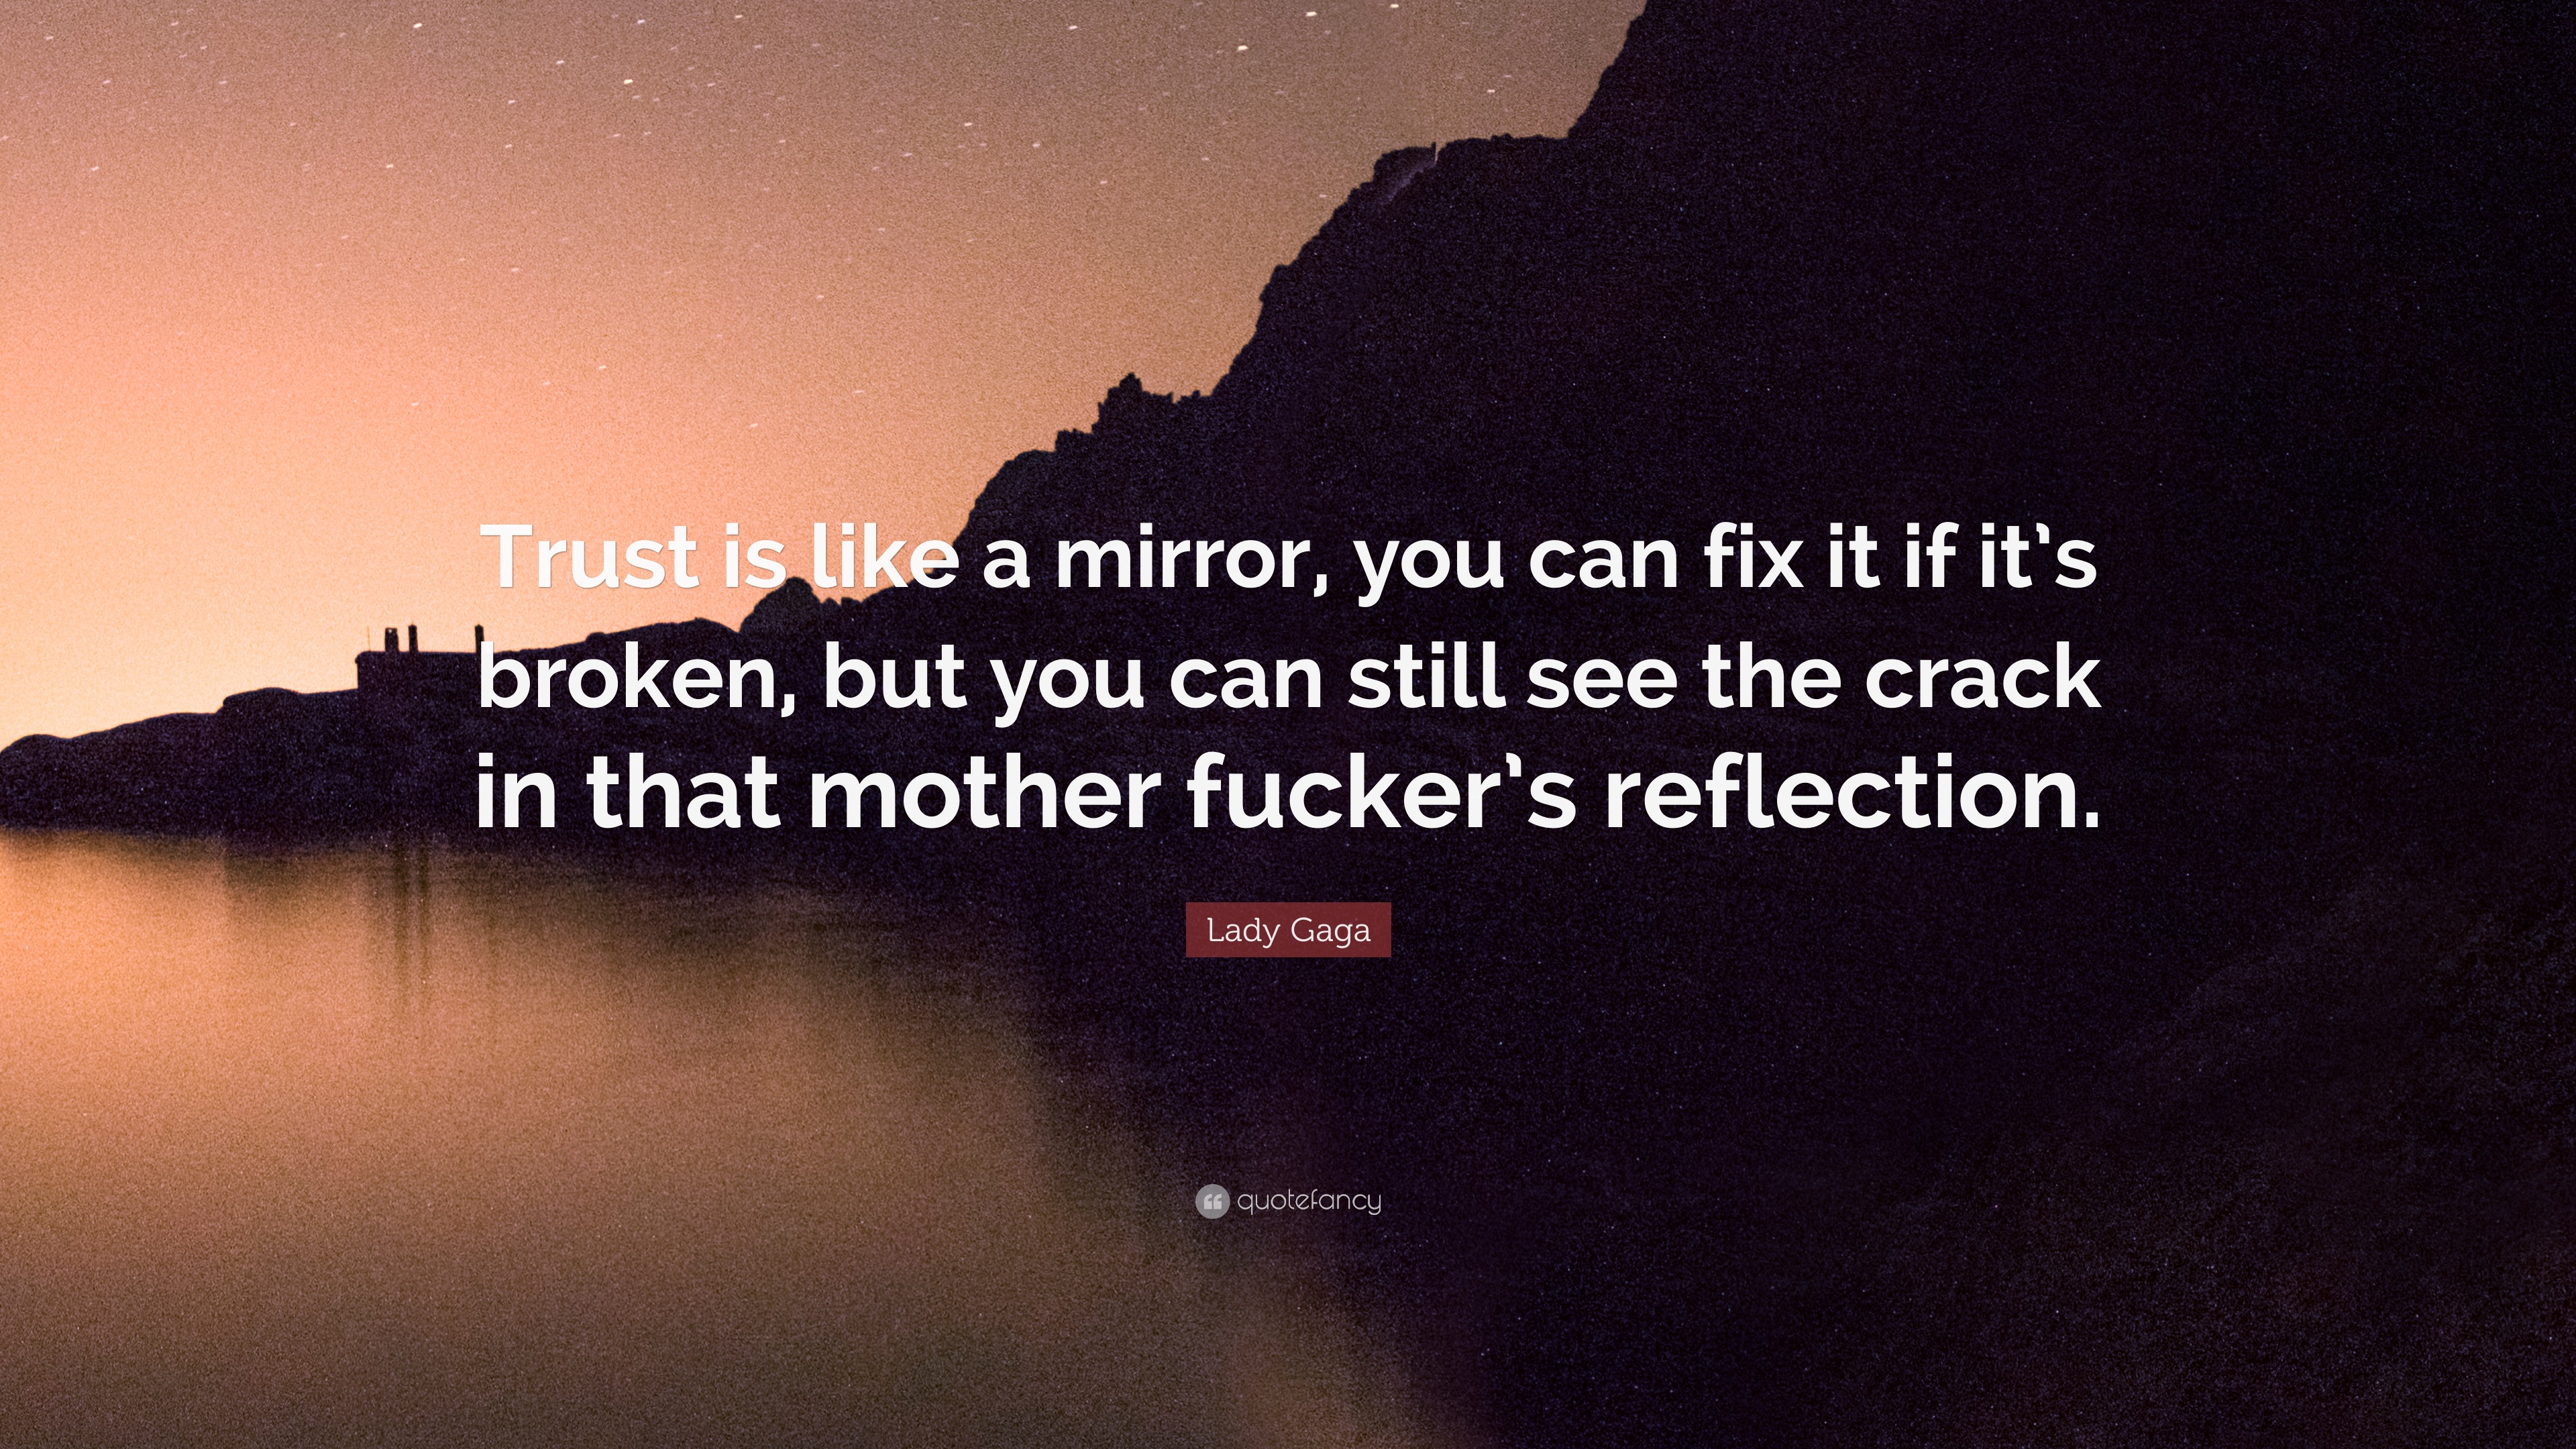 Lady Gaga Quote “Trust is like a mirror you can fix it if